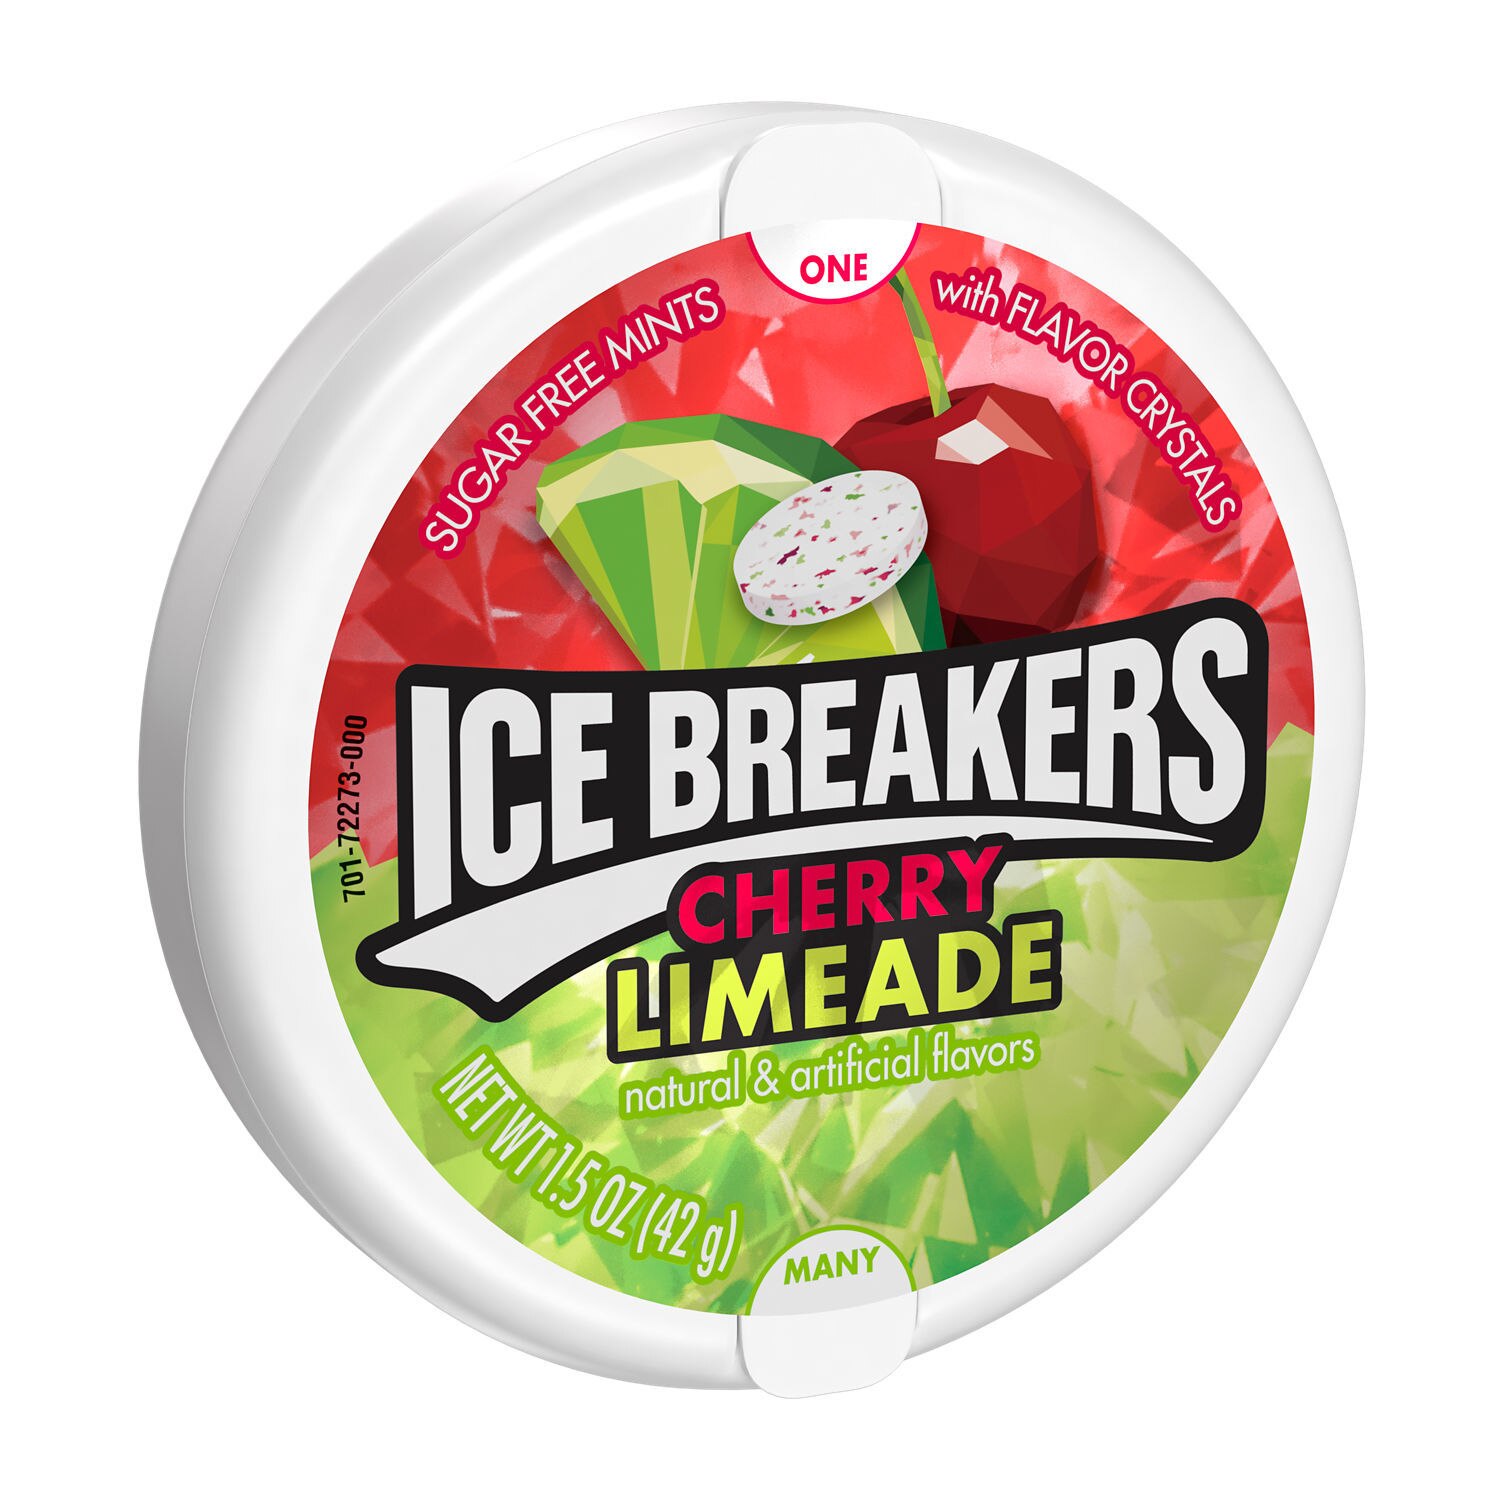 ICE BREAKERS Cherry Limeade Flavored Sugar Free Breath Mints, 1.5 oz, Tin